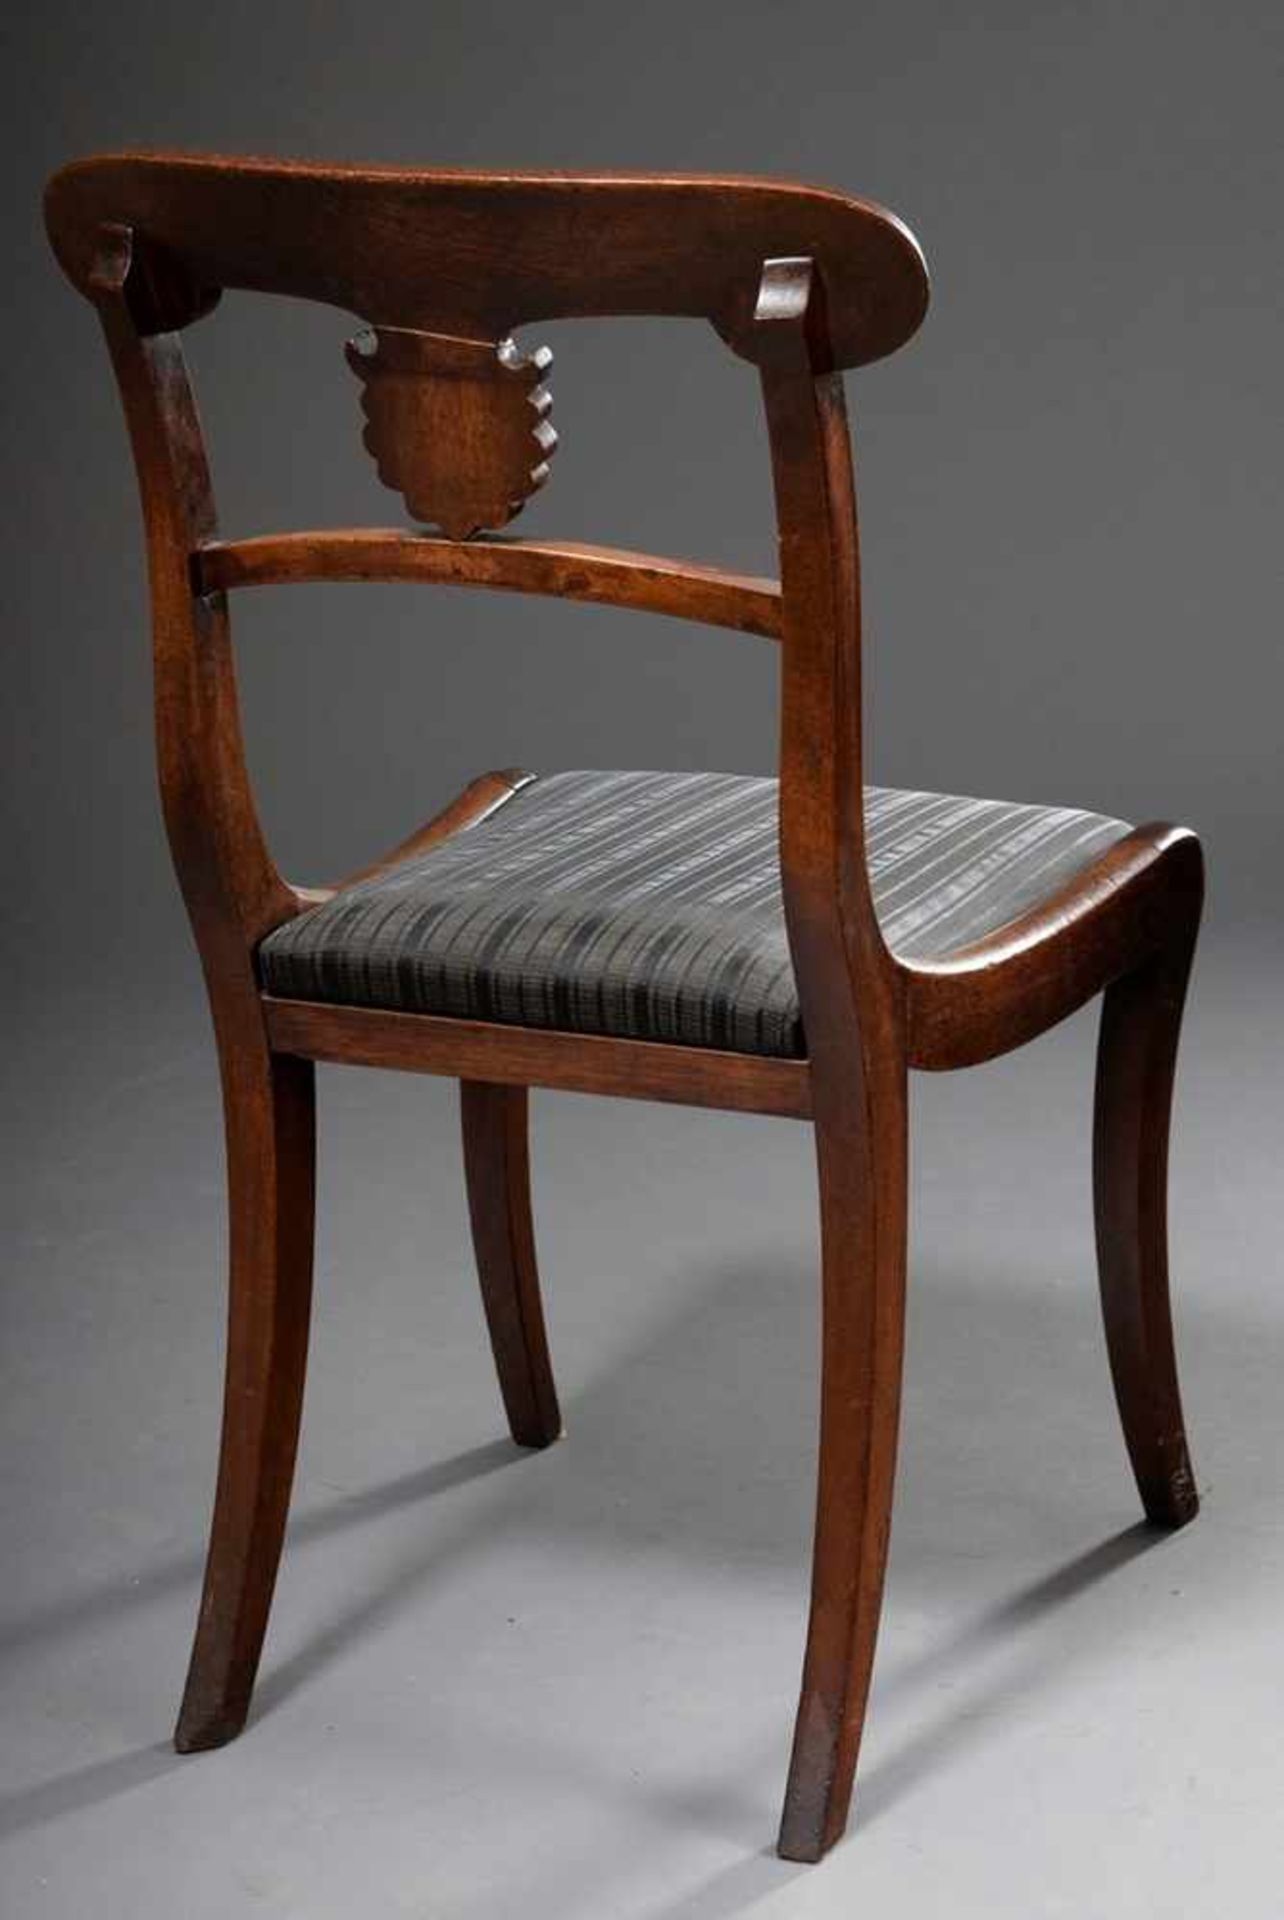 5 English Sheraton chairs with carved backrests and sabre legs, 1x with armrests, mahogany, - Image 4 of 7